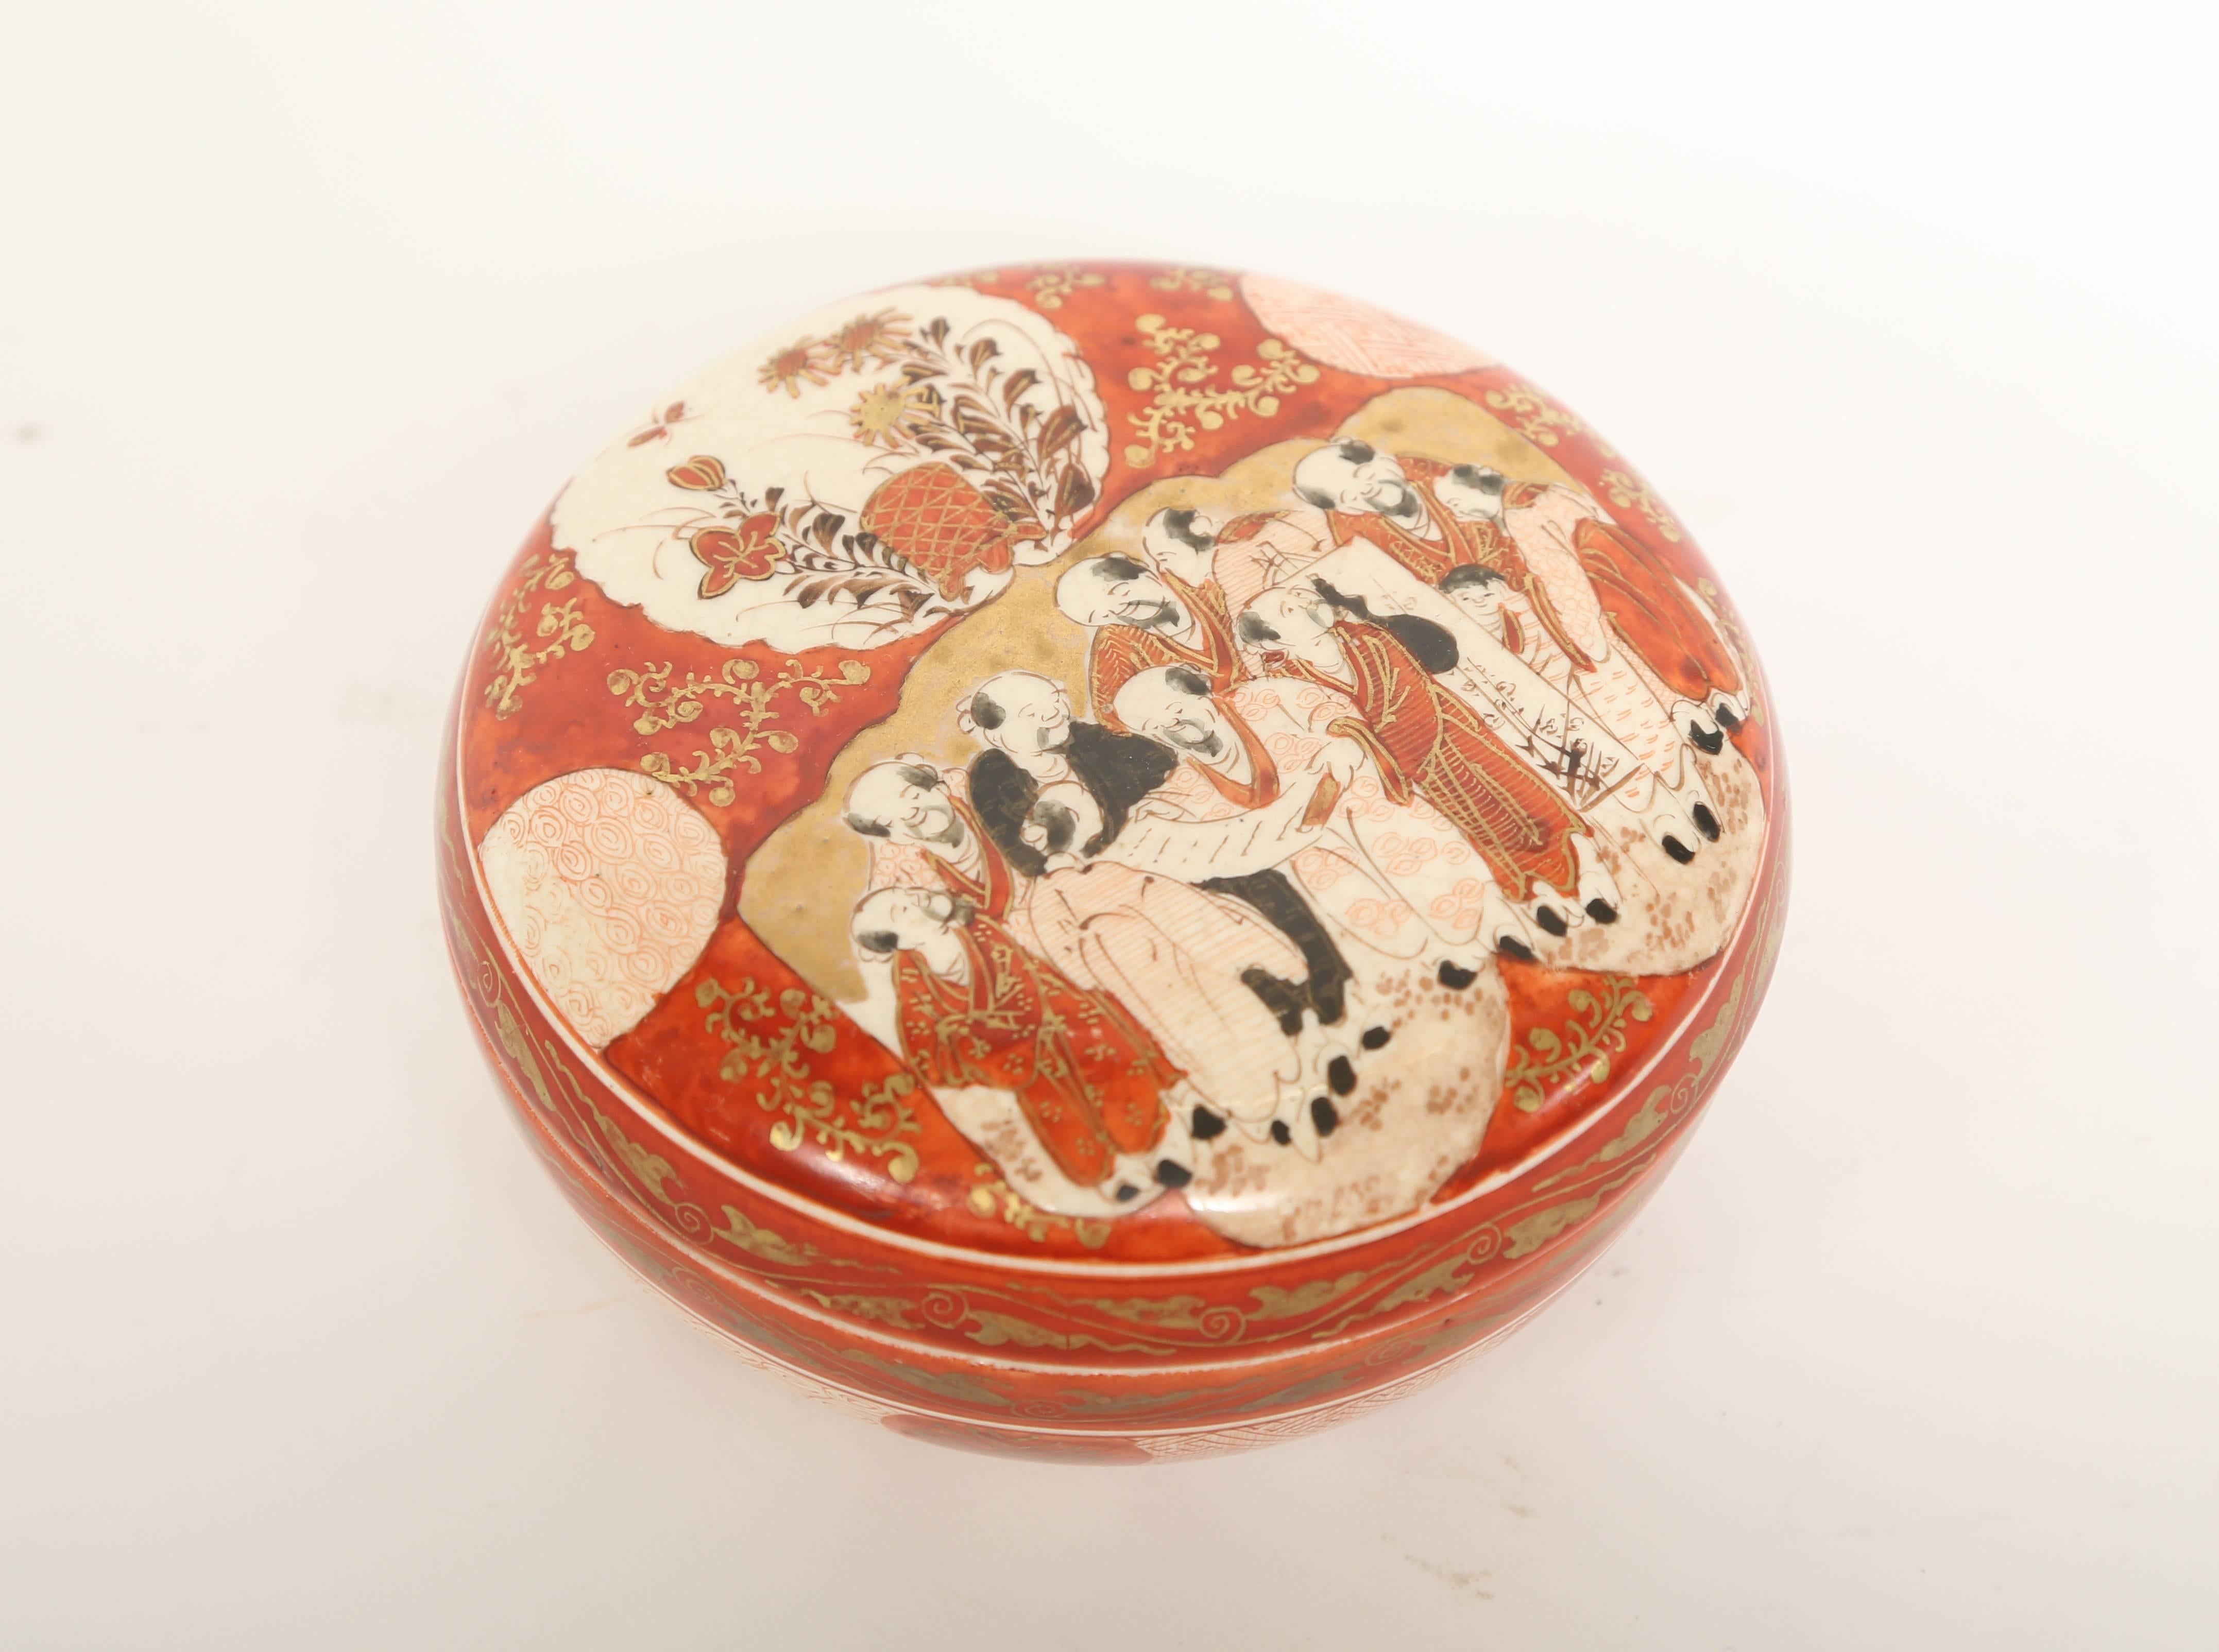 Meiji period Kutani (nine valleys) hand decorated round covered box. Hand decorated in iron red with details picked out in gold and black. The interior lid and box are decorated with dogwood blossoms. The characters on the base mean